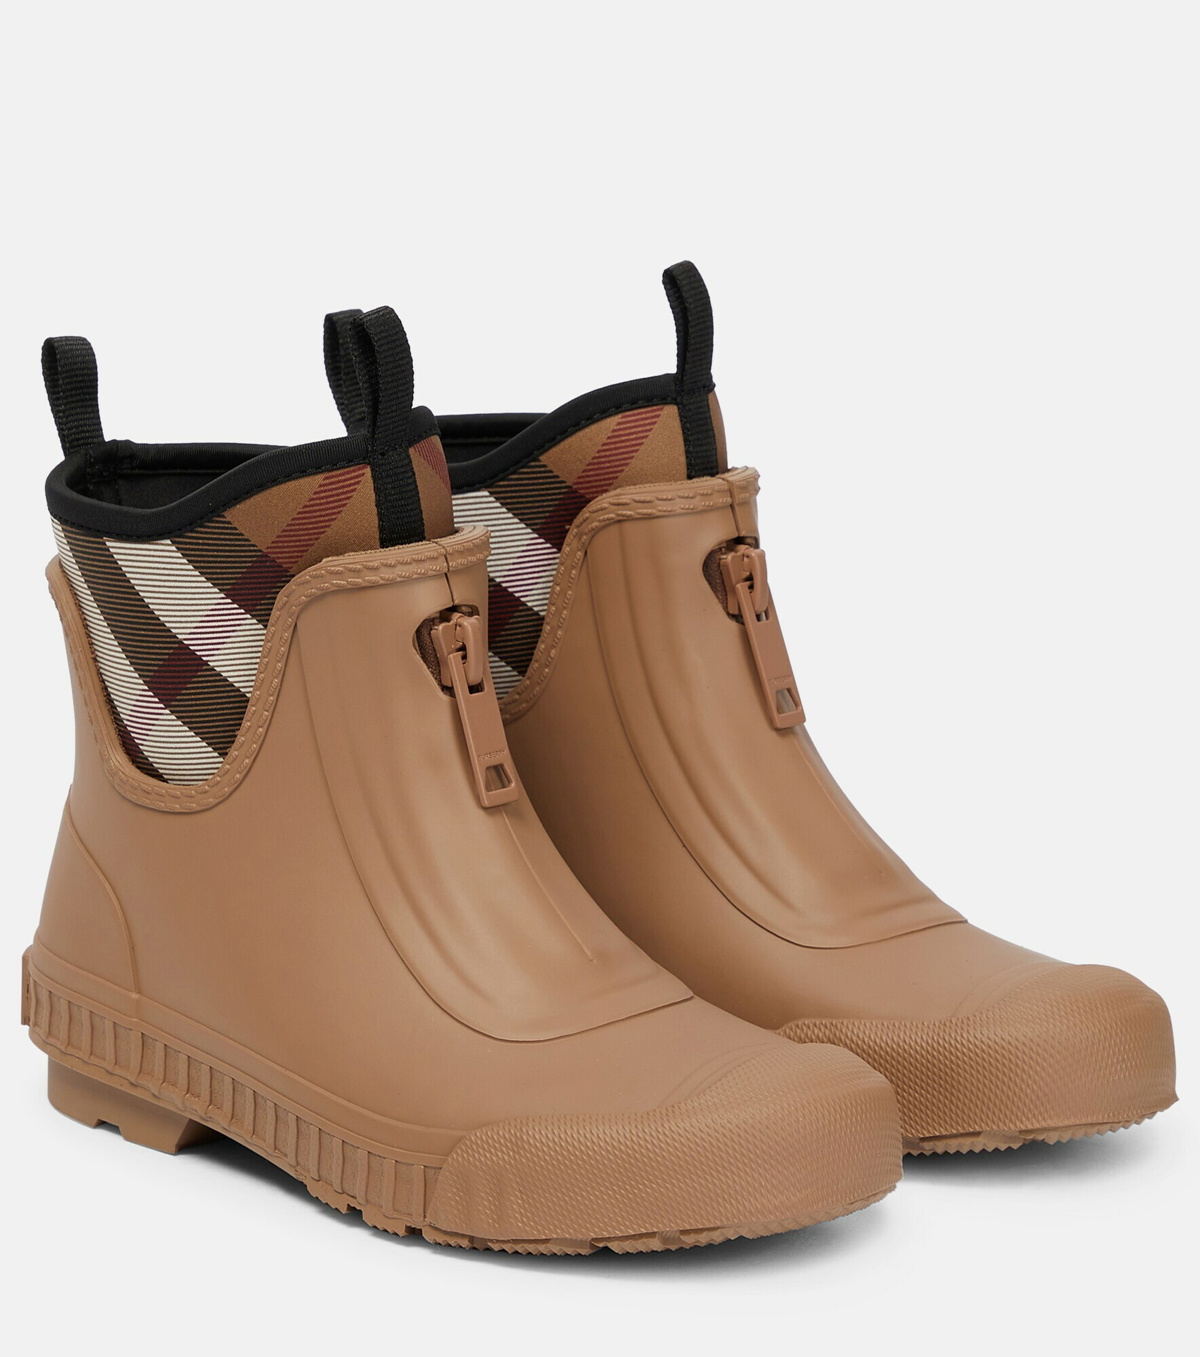 Burberry Vintage Check Canvas & Rubber Rain Boot in Brown